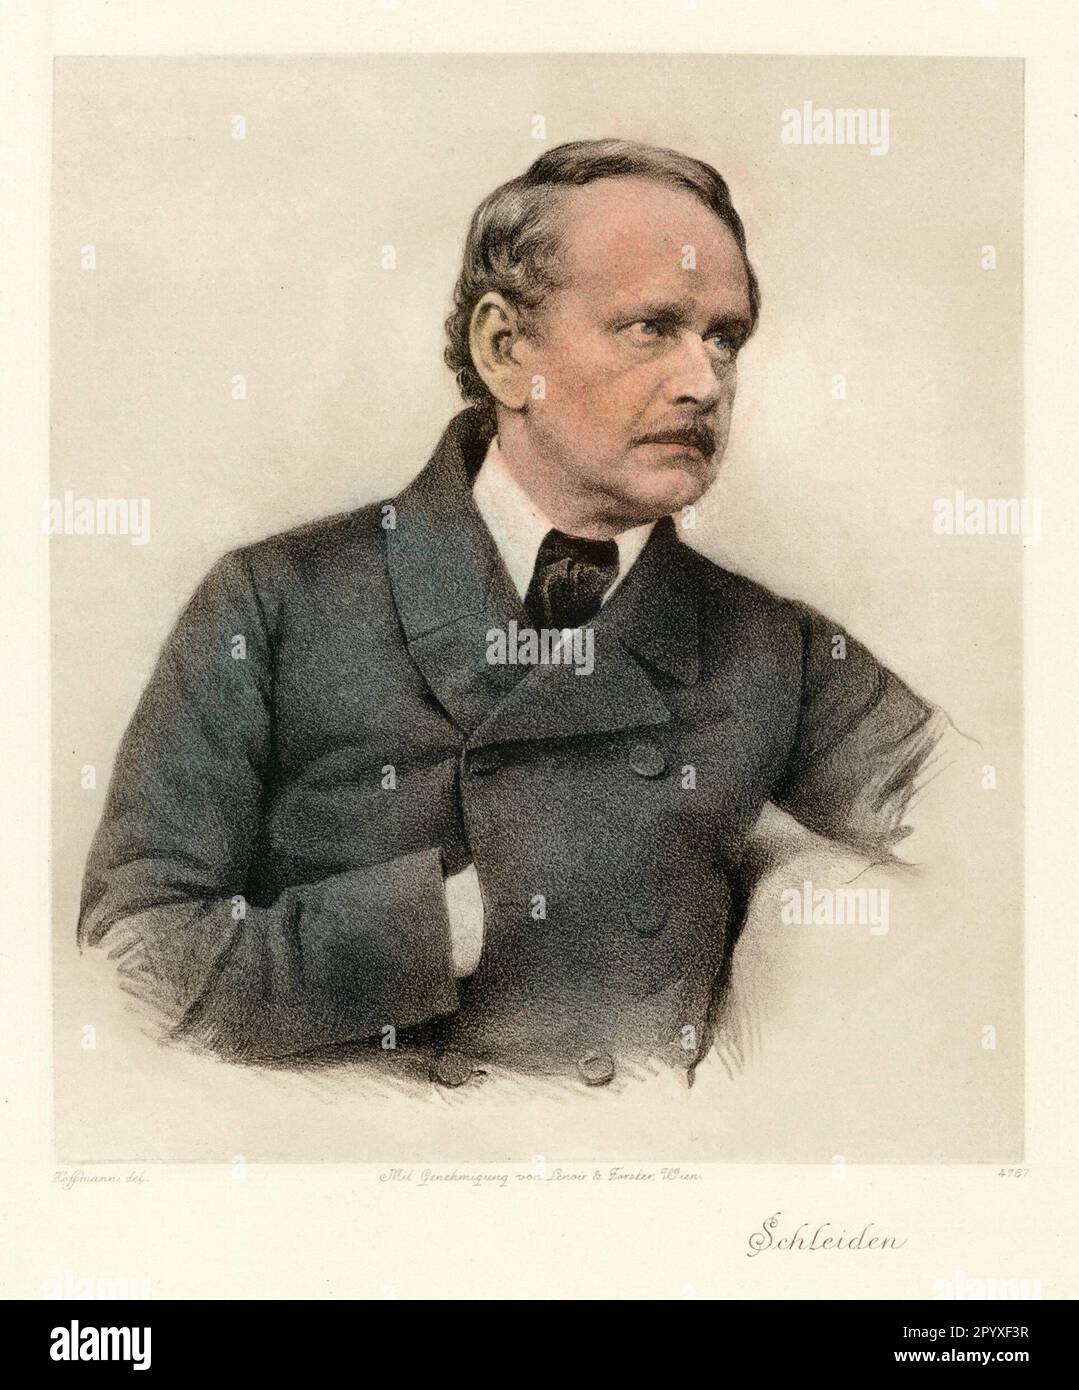 Matthias Jakob Schleiden (1804-1881), German naturalist. Together with Theodor Schwann, Schleiden founded the cell theory of organisms and emphasized the importance of the cell nucleus for cell division. Drawing by Hoffmann. Photo: Heliogravure, Corpus Imaginum, Hanfstaengl Collection. [automated translation] Stock Photo